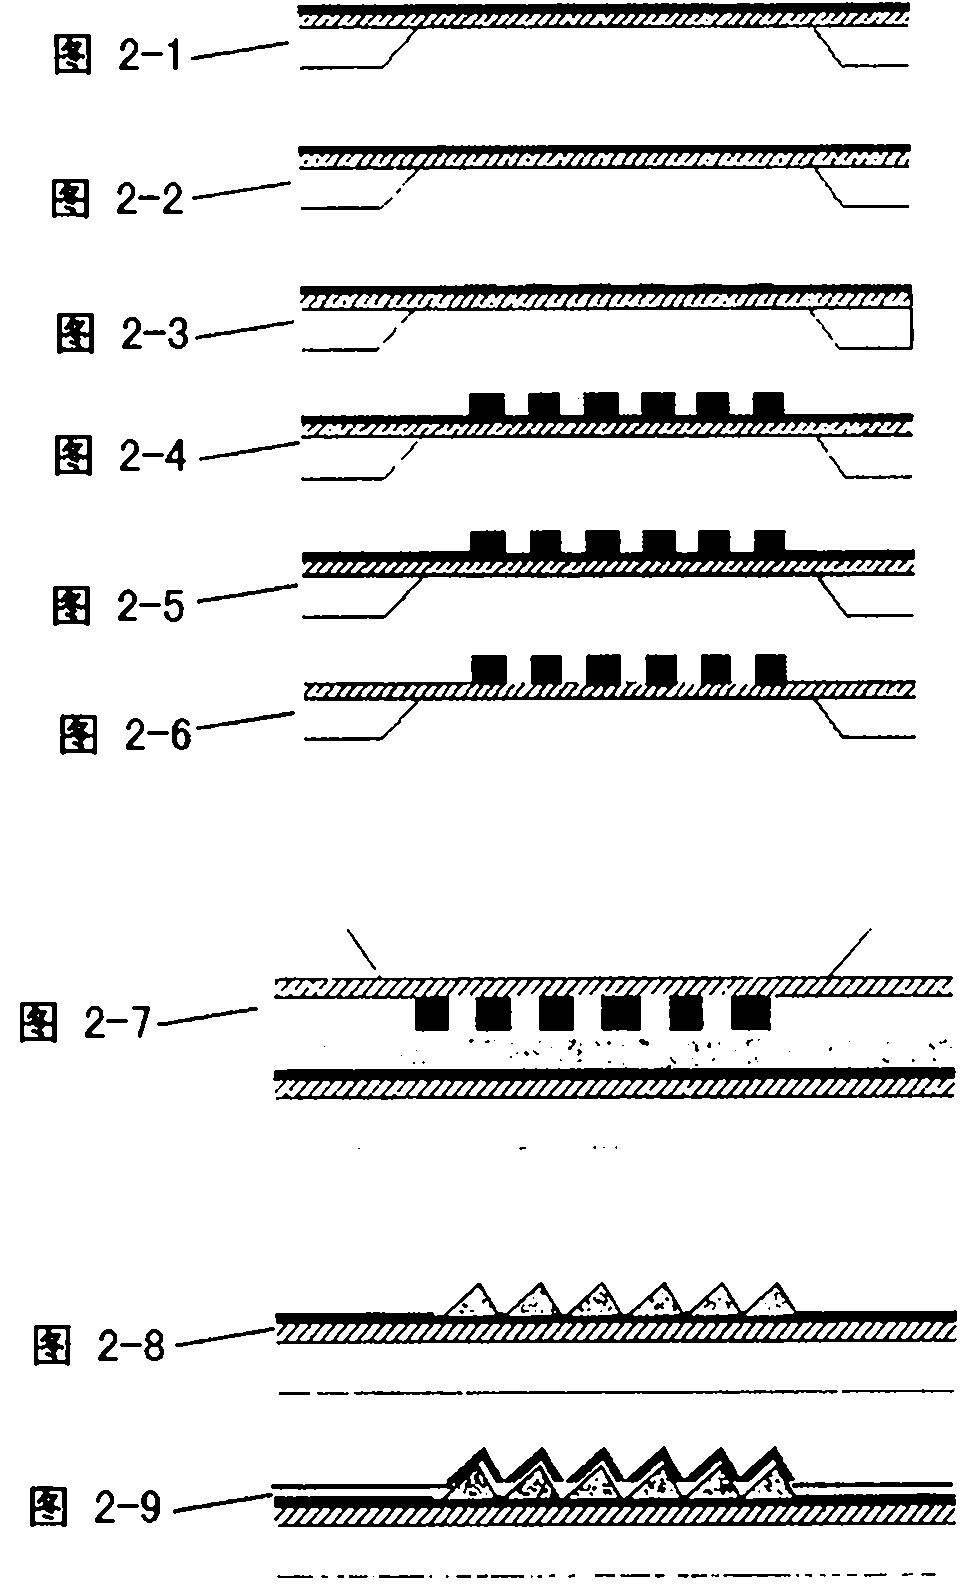 Method for producing multilayer film blazed grating based on electron beam lithography and X-ray exposure